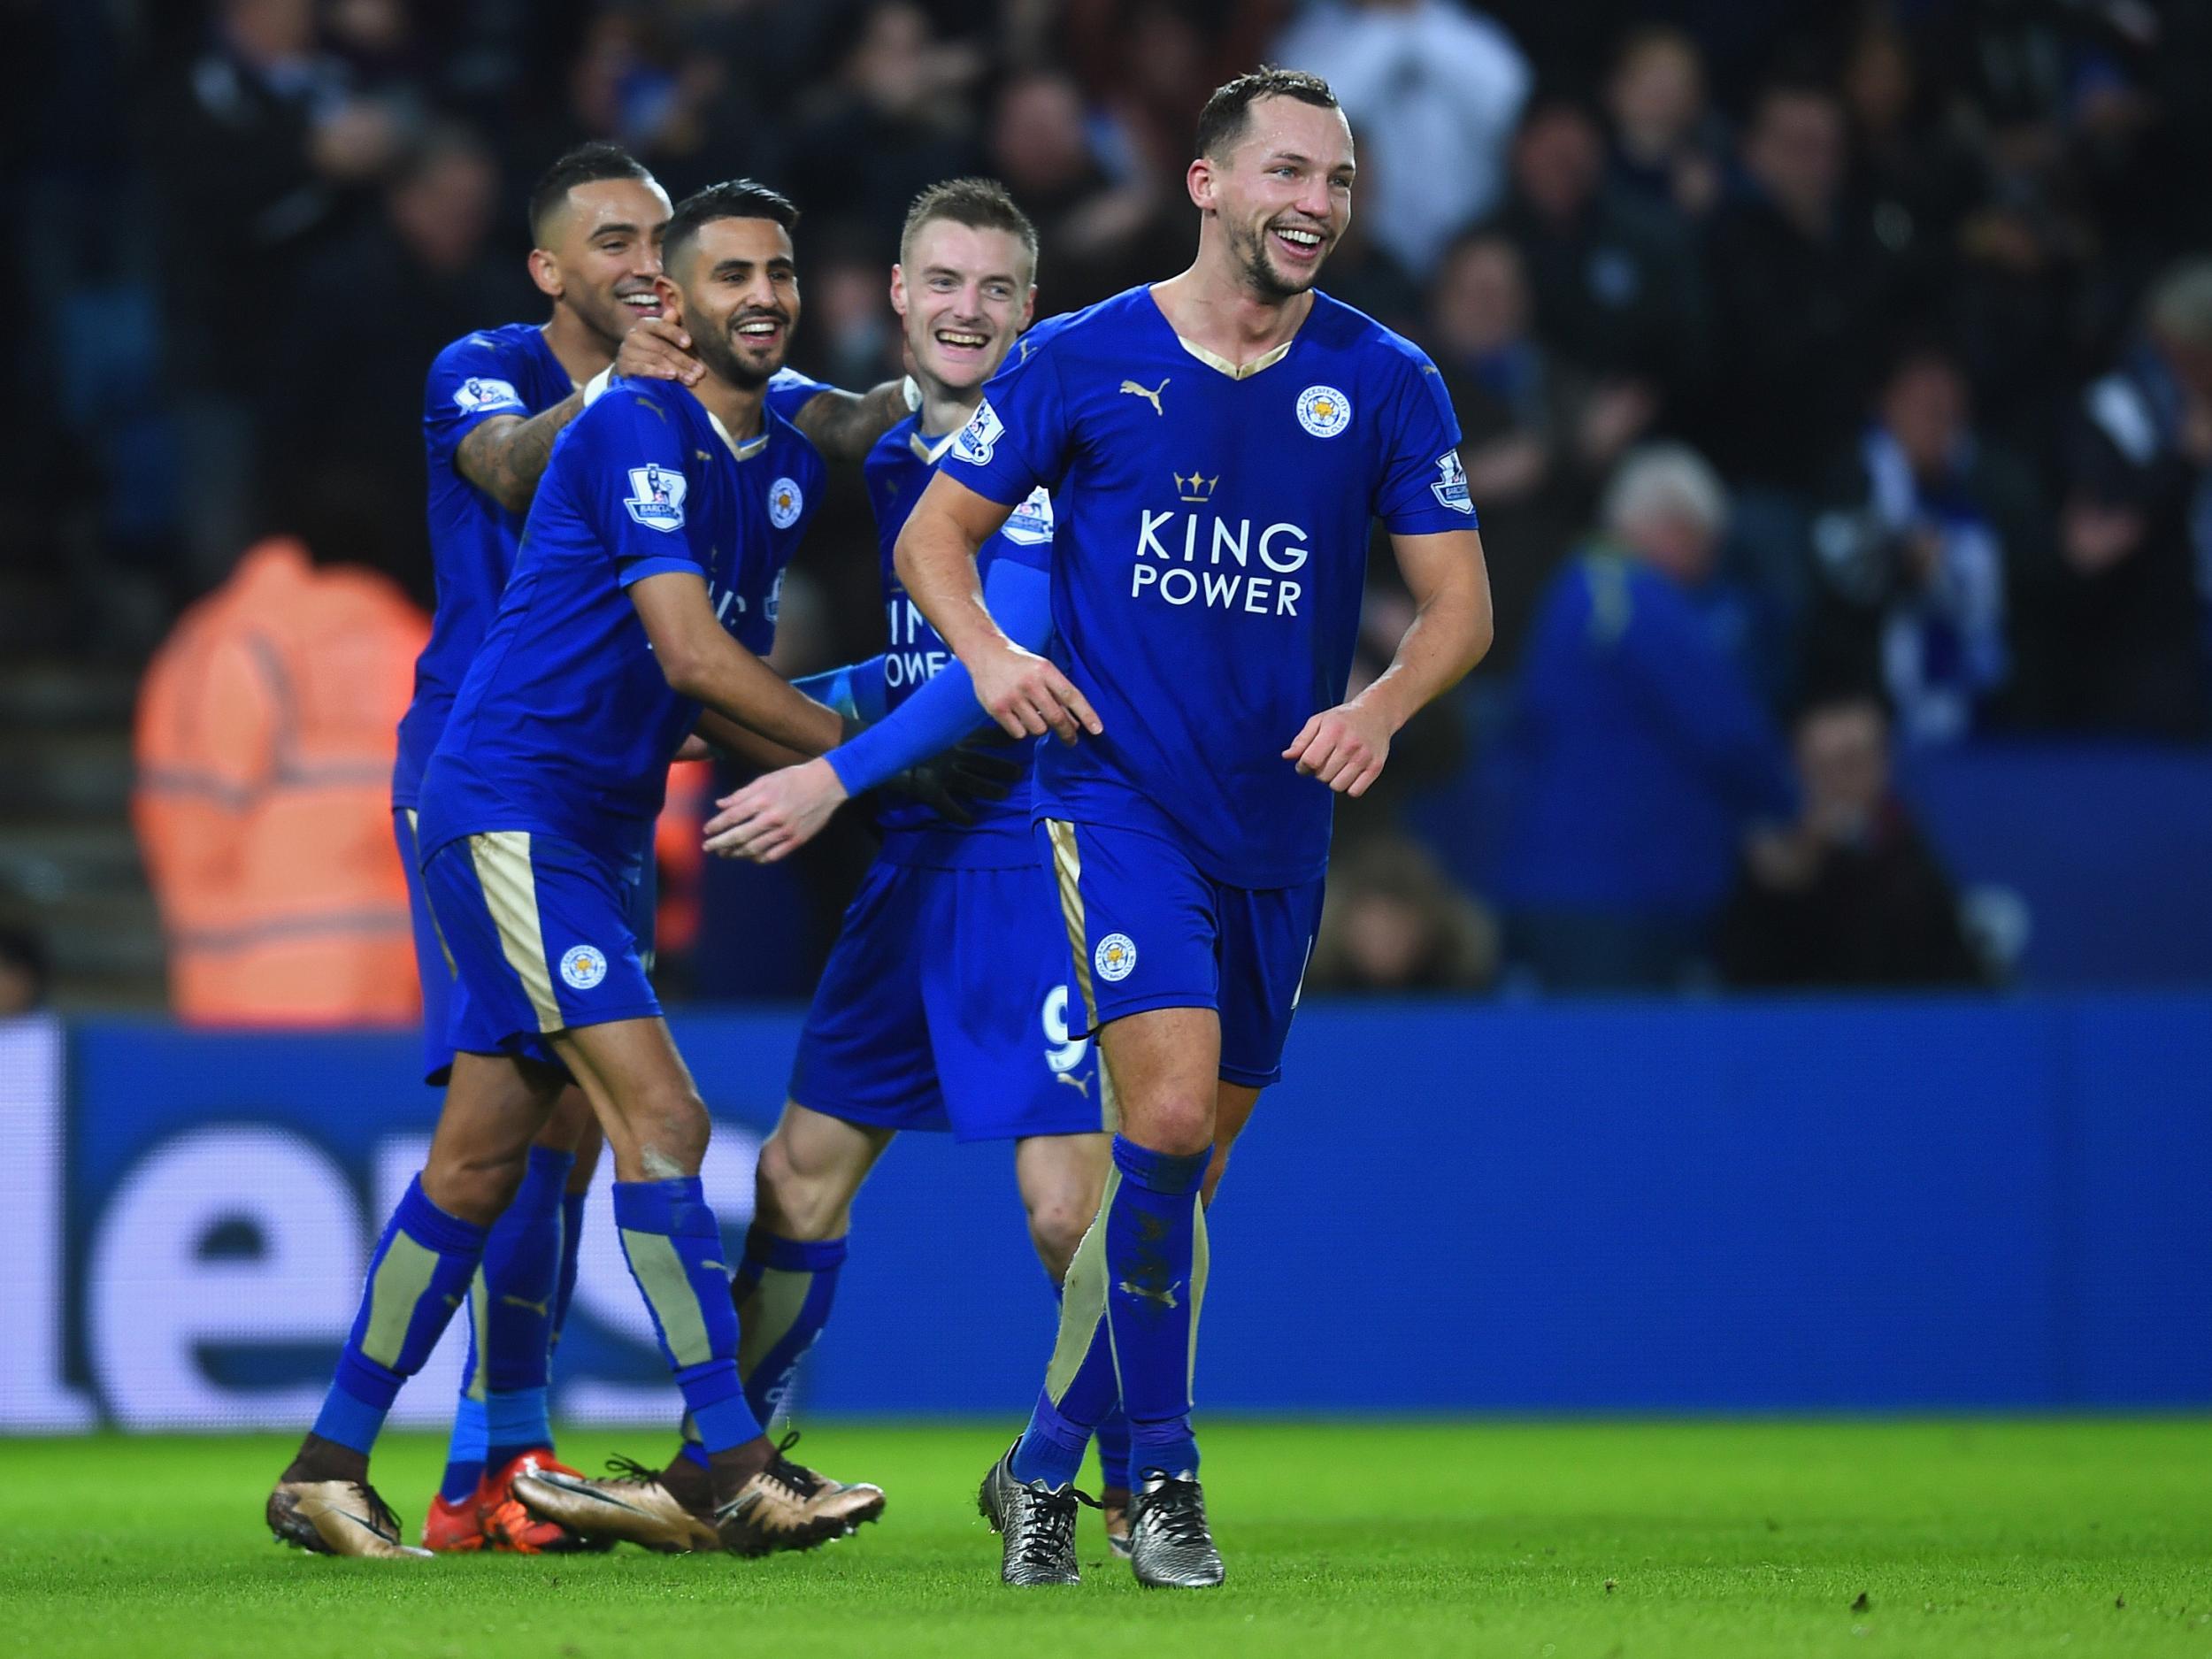 Danny Drinkwater celebrates scoring against Stoke for Leicester City